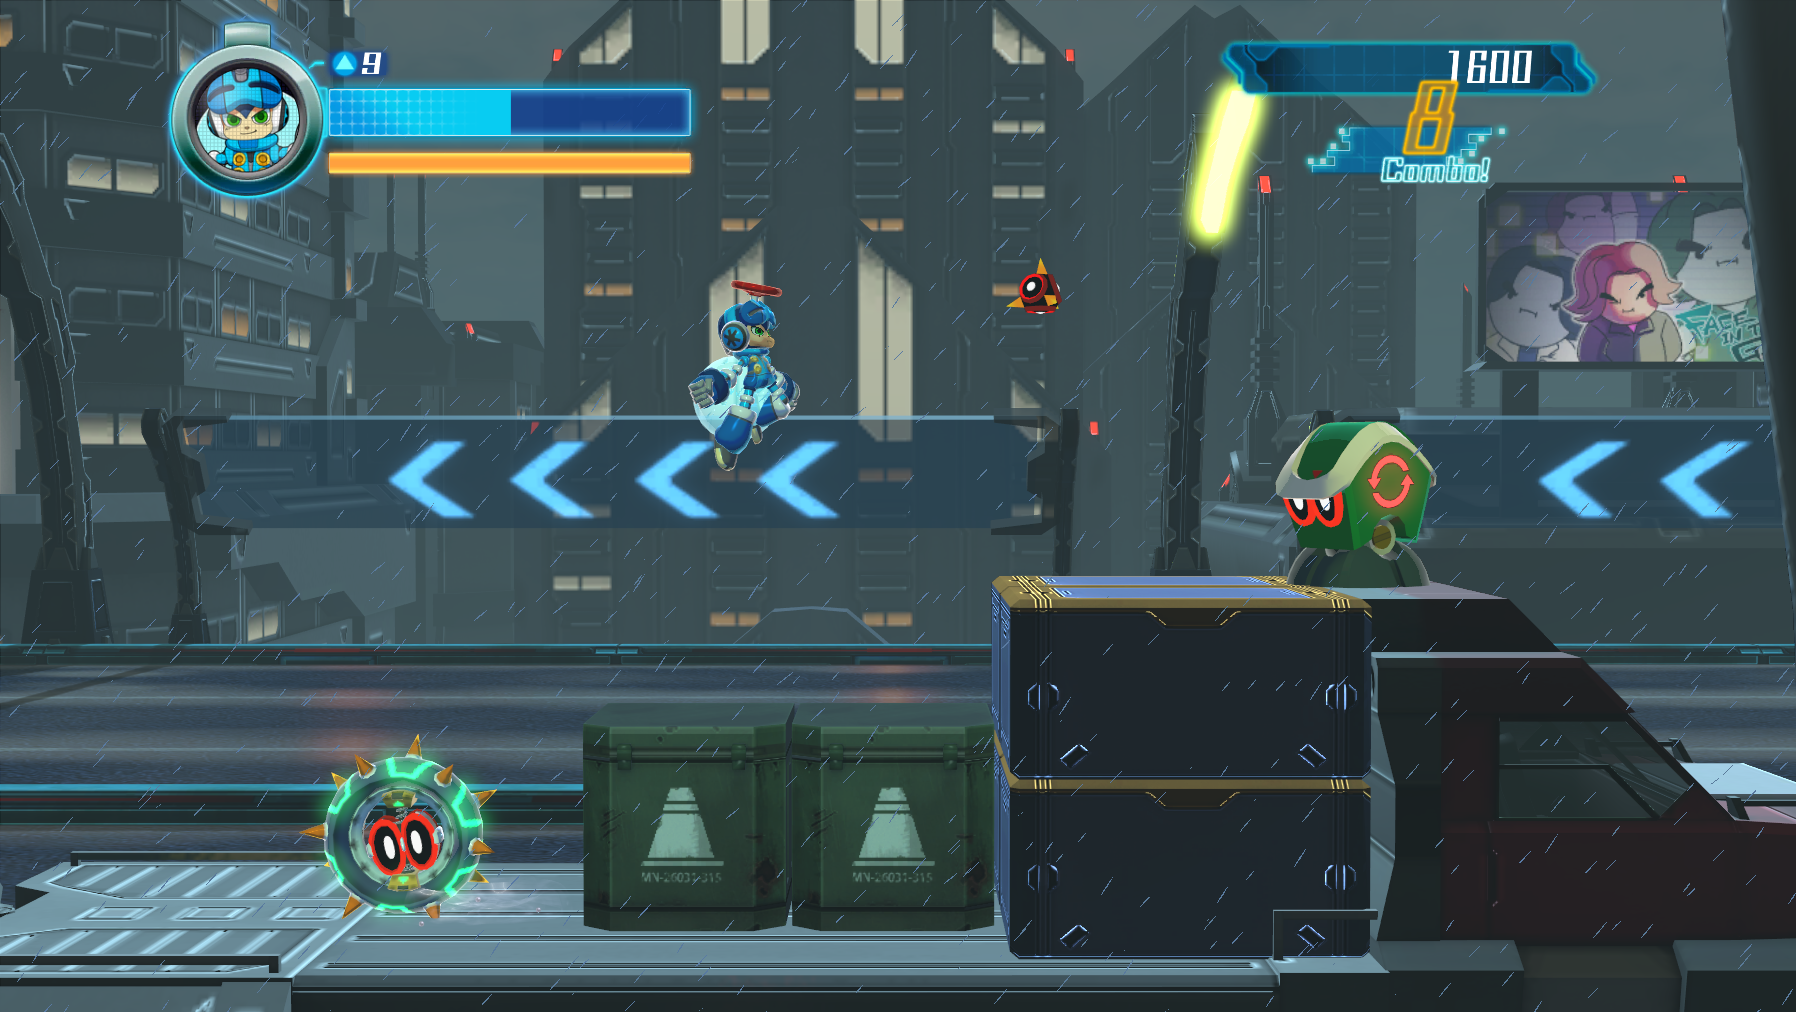 Игры game 9. Mighty no. 9. Игра Mighty number 9. Мегамен 9 игра геймплей. Mighty number 9 Скриншоты.